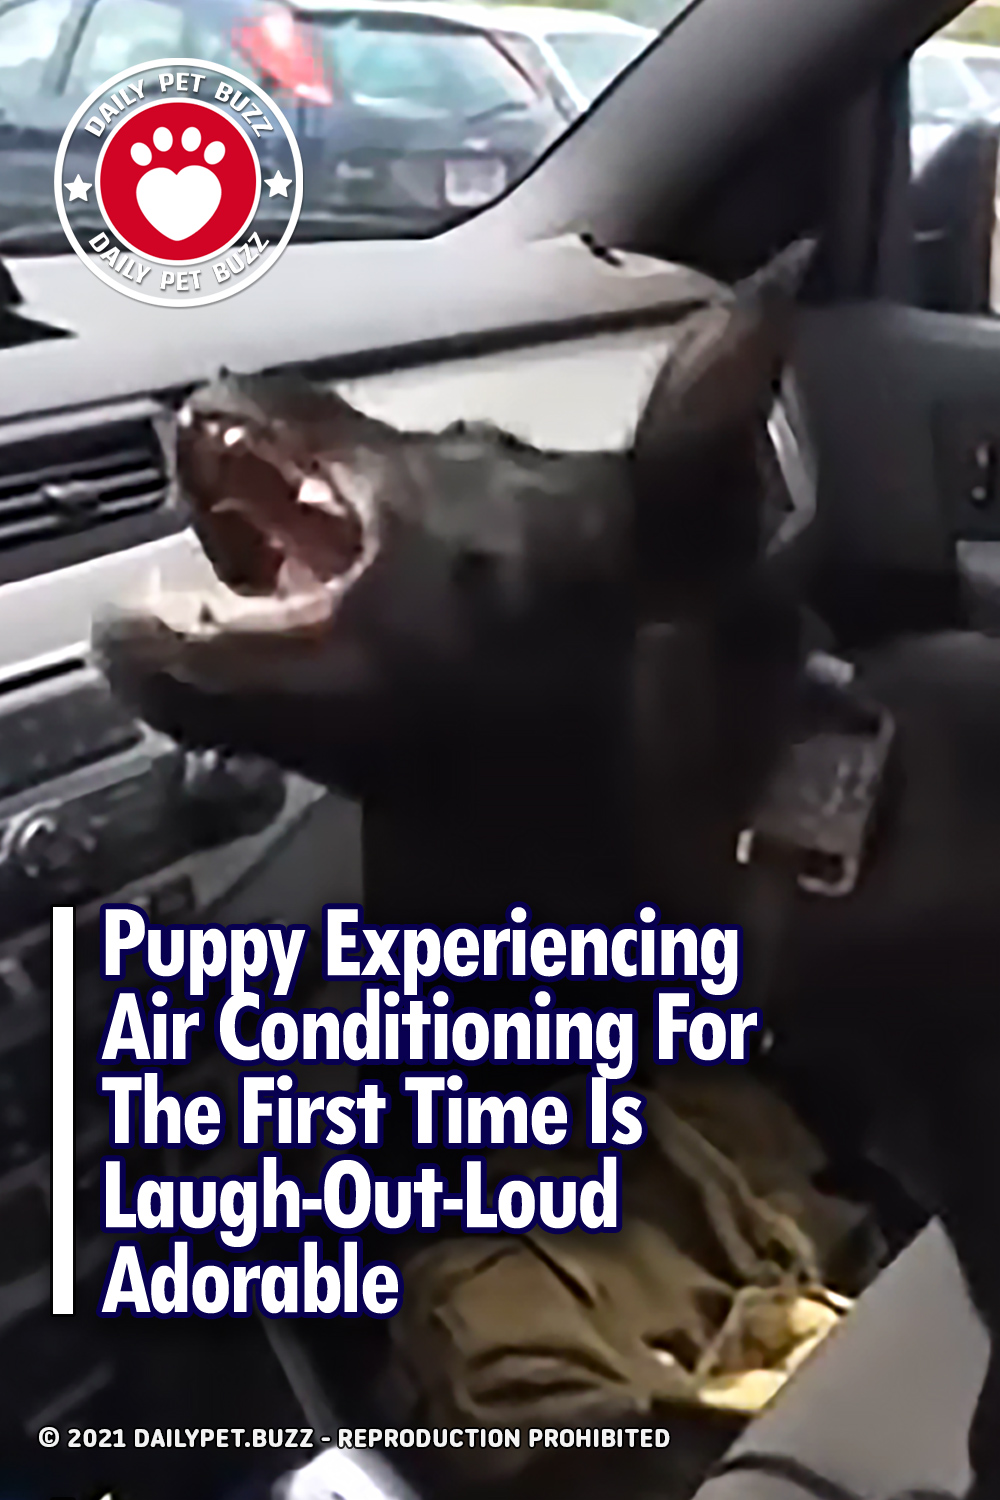 Puppy Experiencing Air Conditioning For The First Time Is Laugh-Out-Loud Adorable